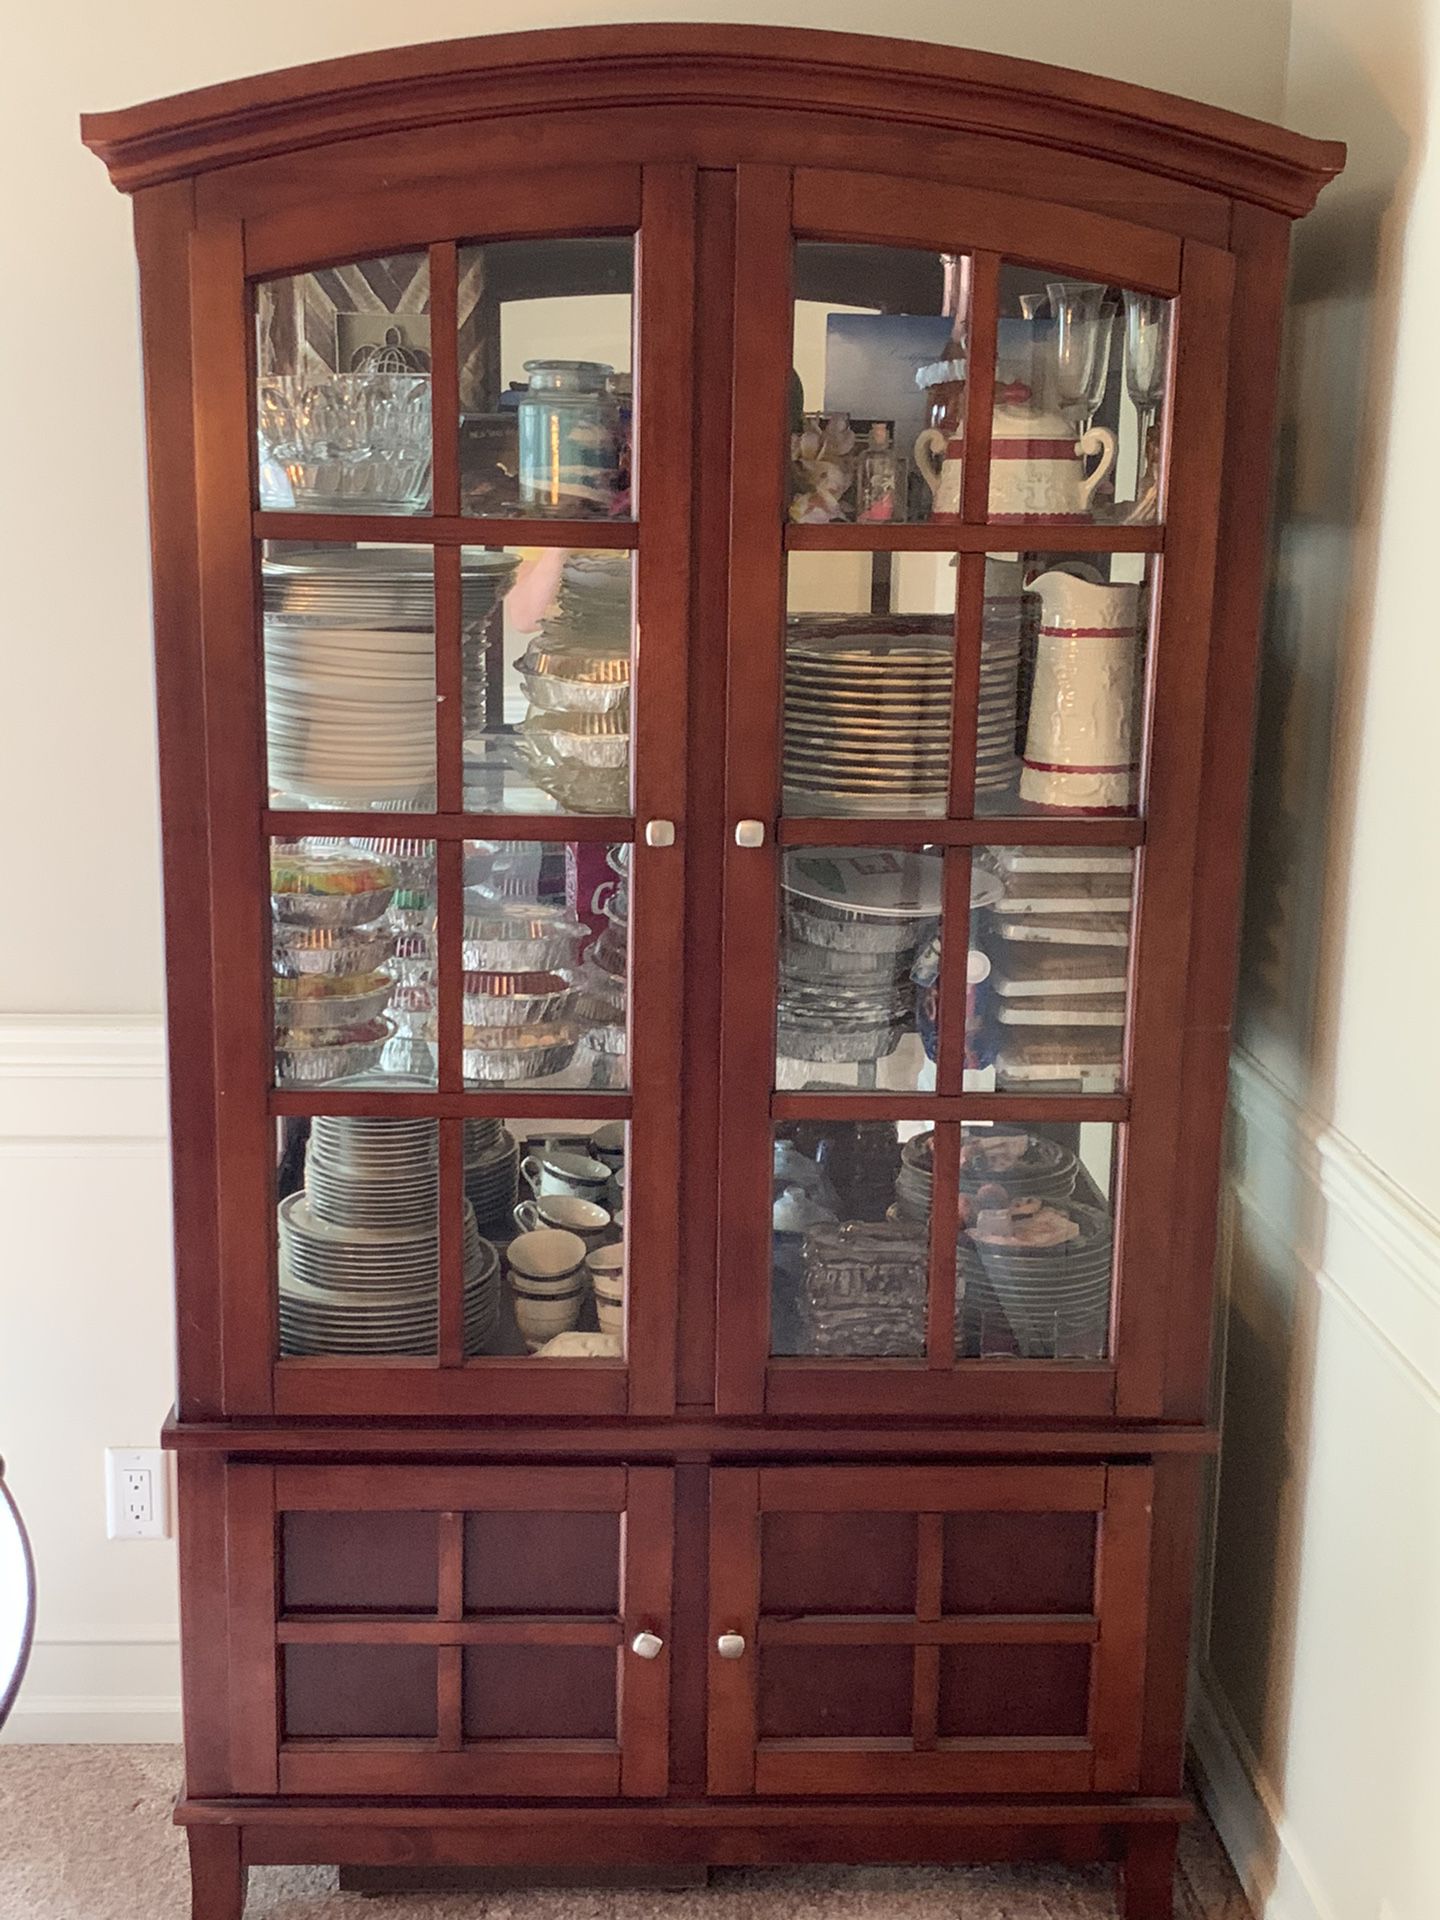 Dining hutch / china cabinet. Walnut color. Solid wood. Glass shelves, doors and side inserts.